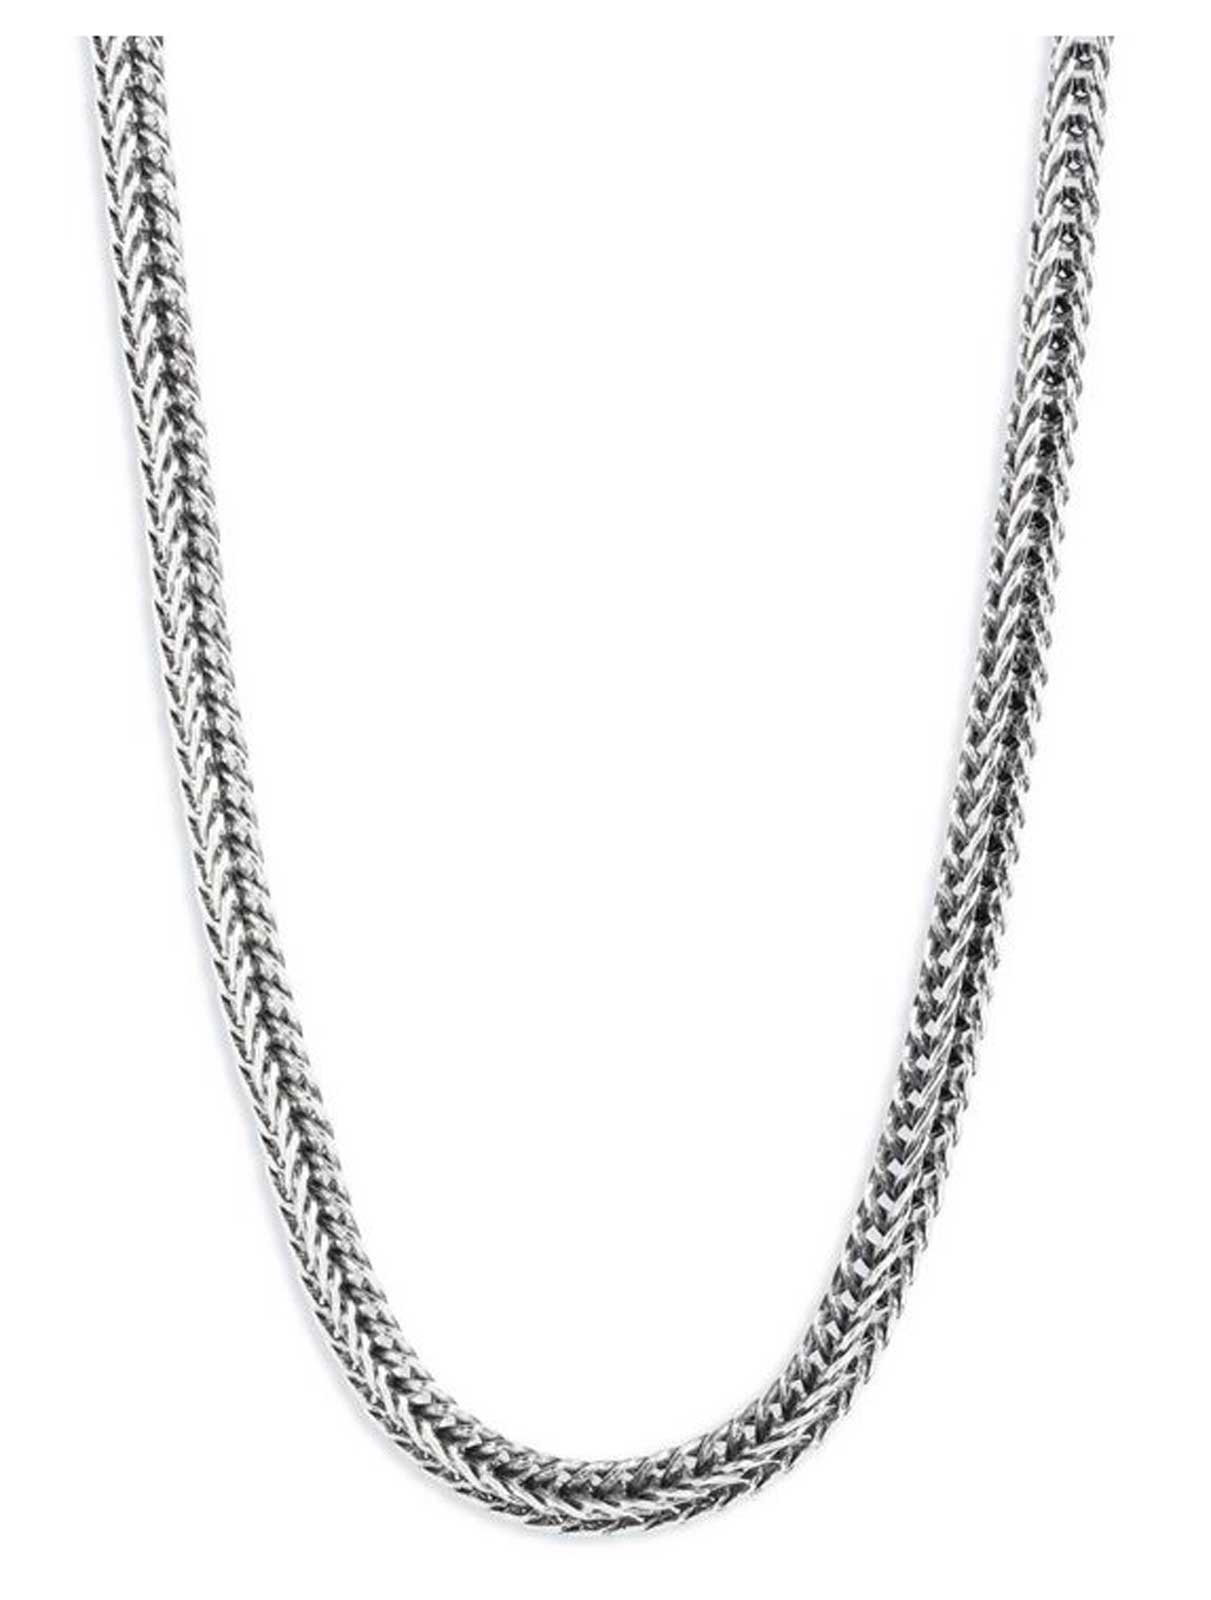 Black Ion Plated Stainless Steel 6 MM Foxtail Chain Necklace: 18 - 30 Inch  | Lynx - YouTube